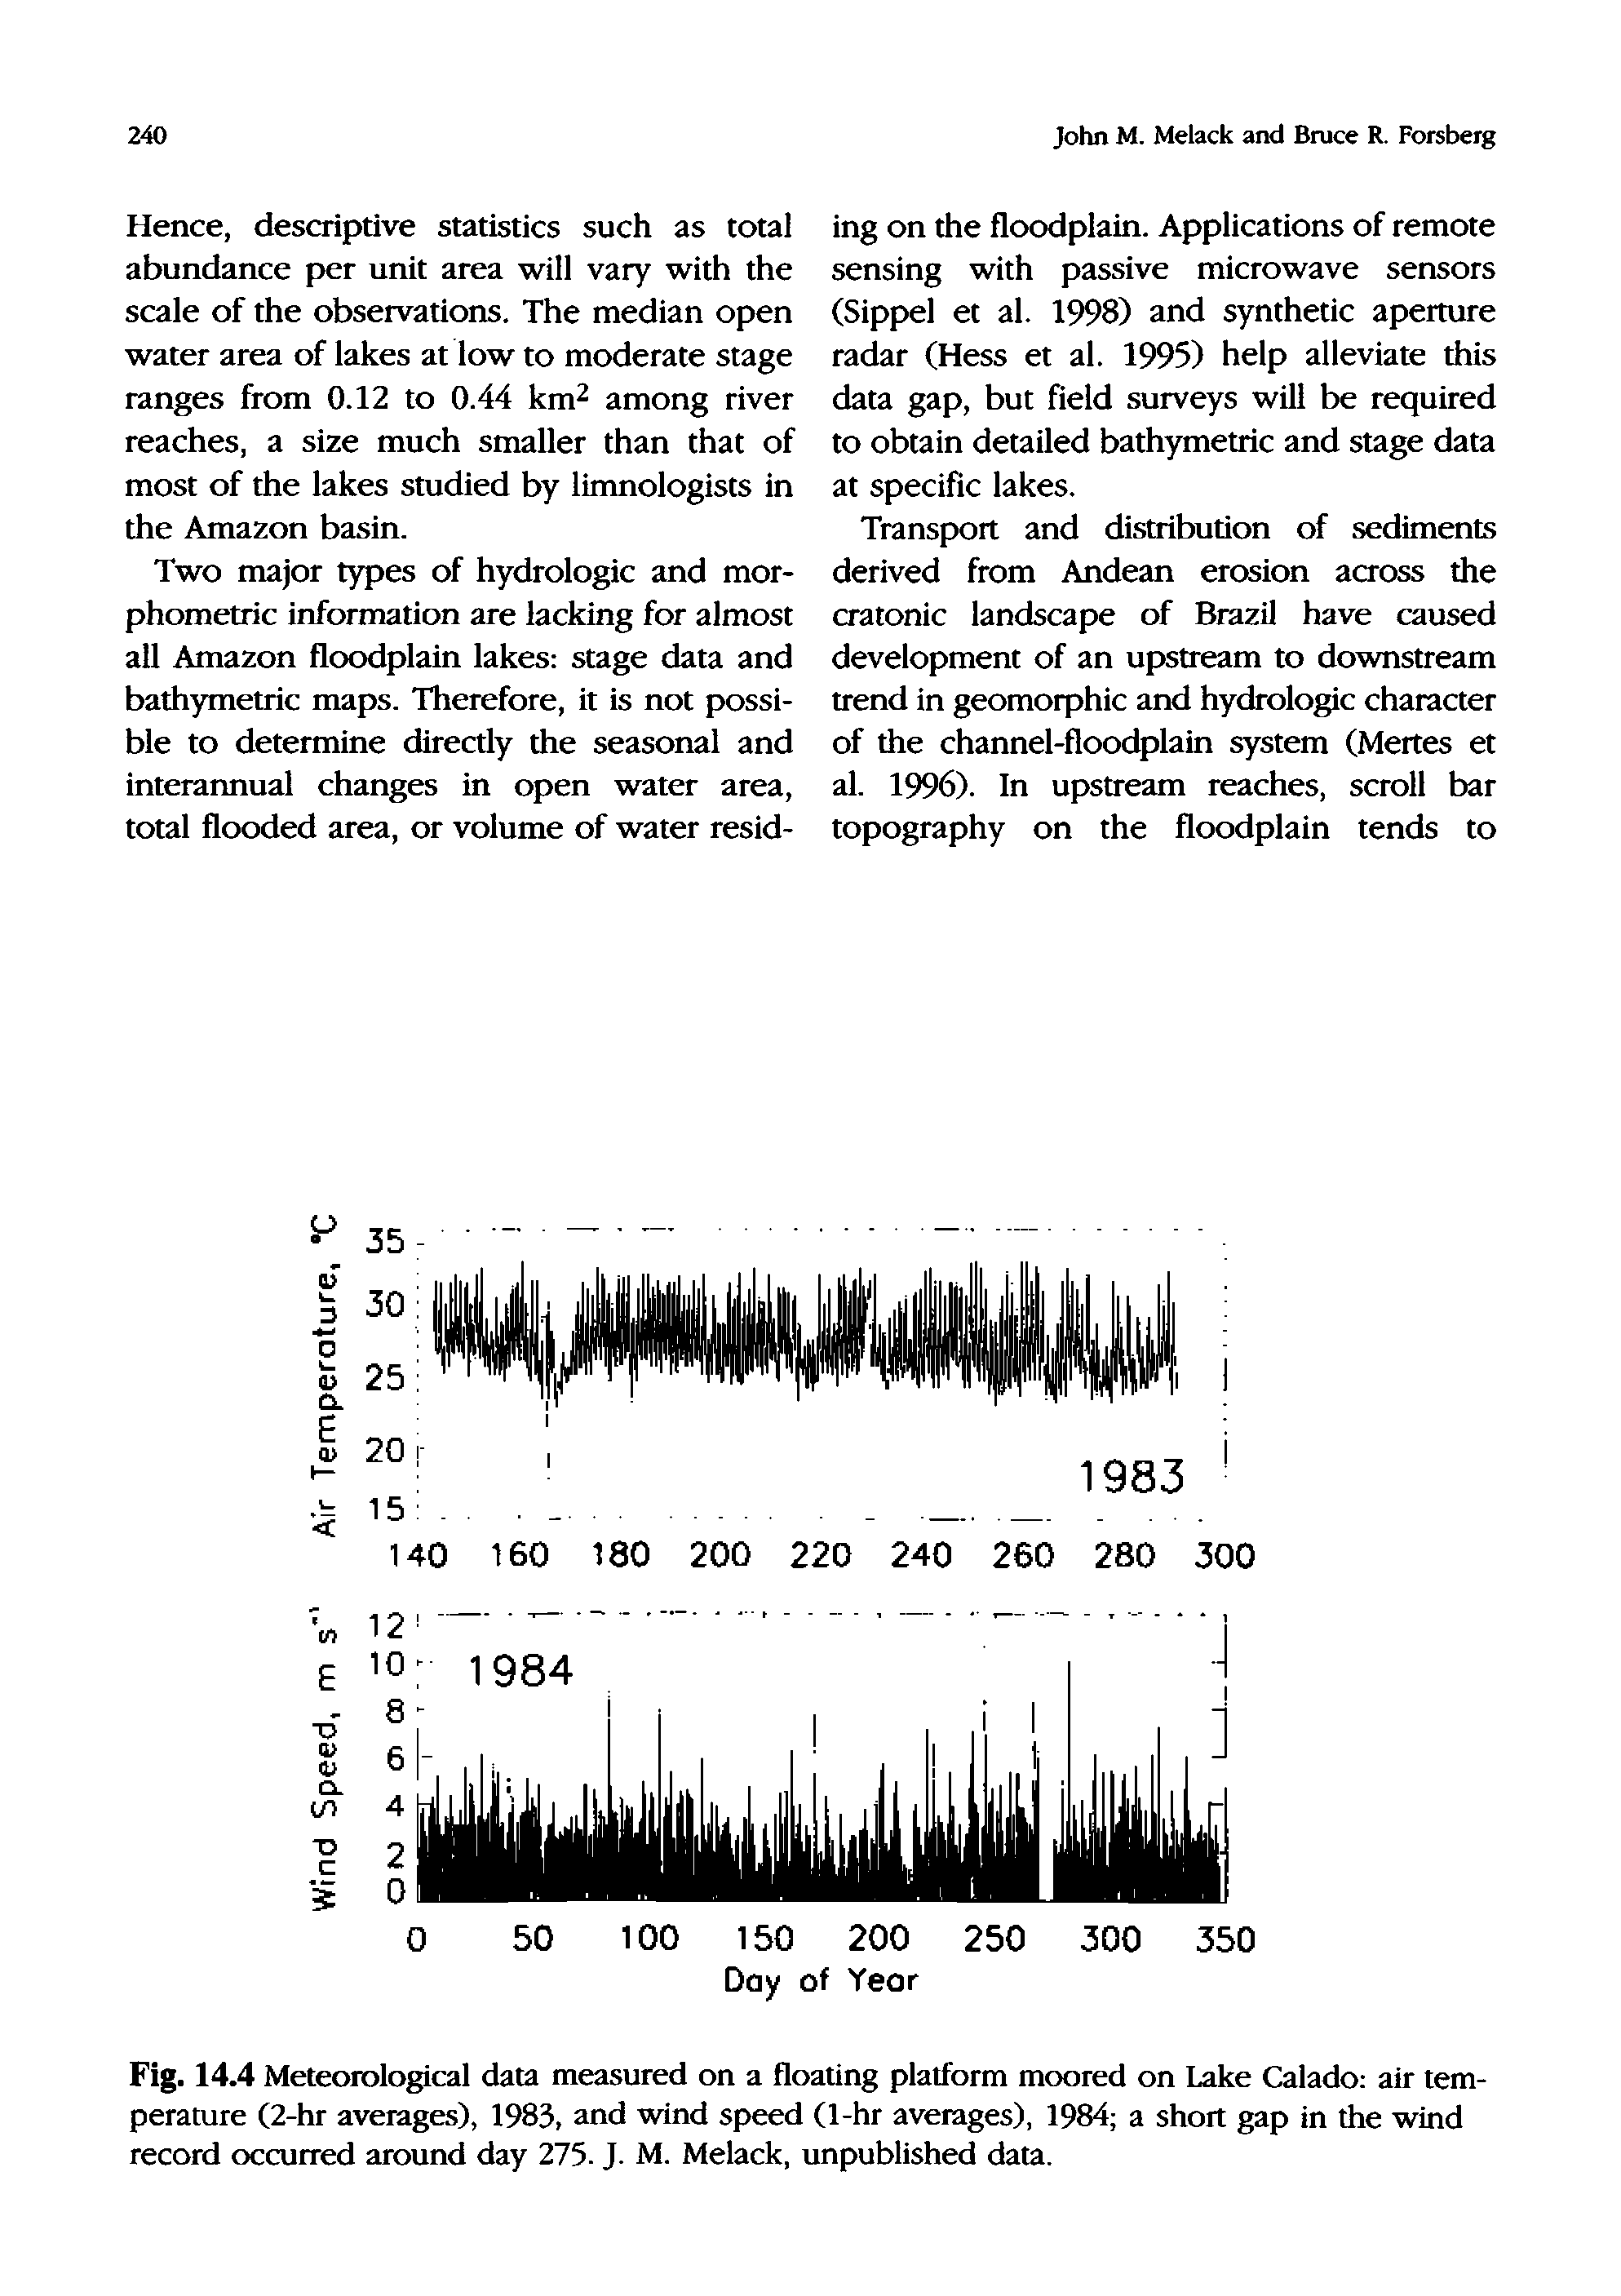 Fig. 14.4 Meteorological data measured on a floating platform moored on Lake Calado air temperature (2-hr averages), 1983, and wind speed (1-hr averages), 1984 a short gap in the wind record occurred around day 275. J. M. Melack, unpublished data.